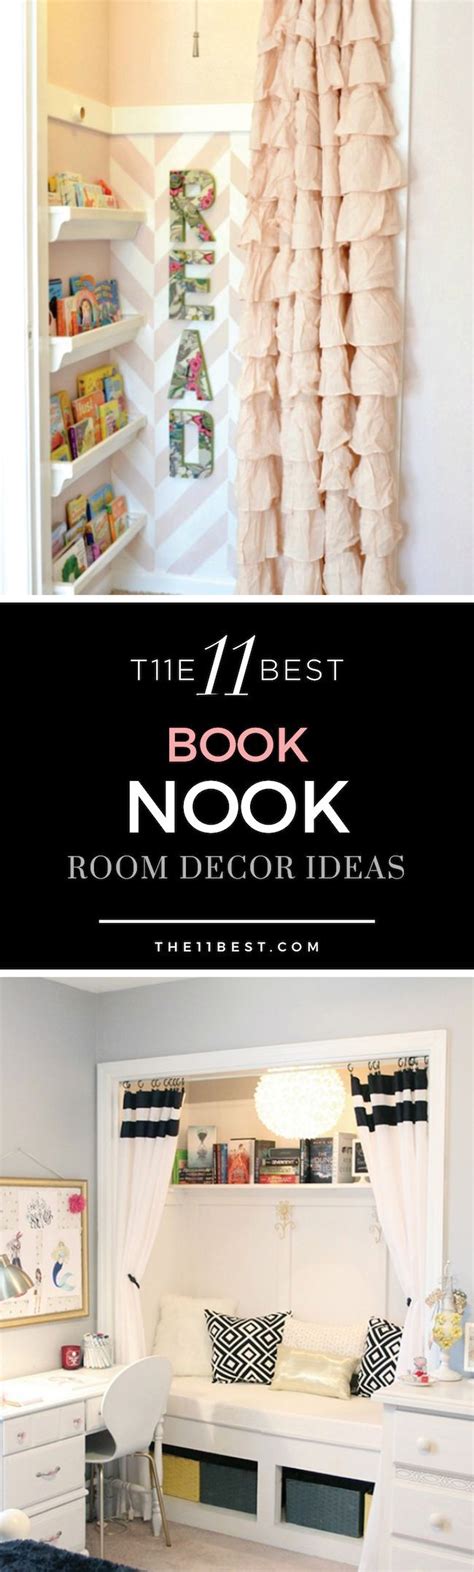 The 11 Best Closet Book Nooks With Images Book Nook Closet Book